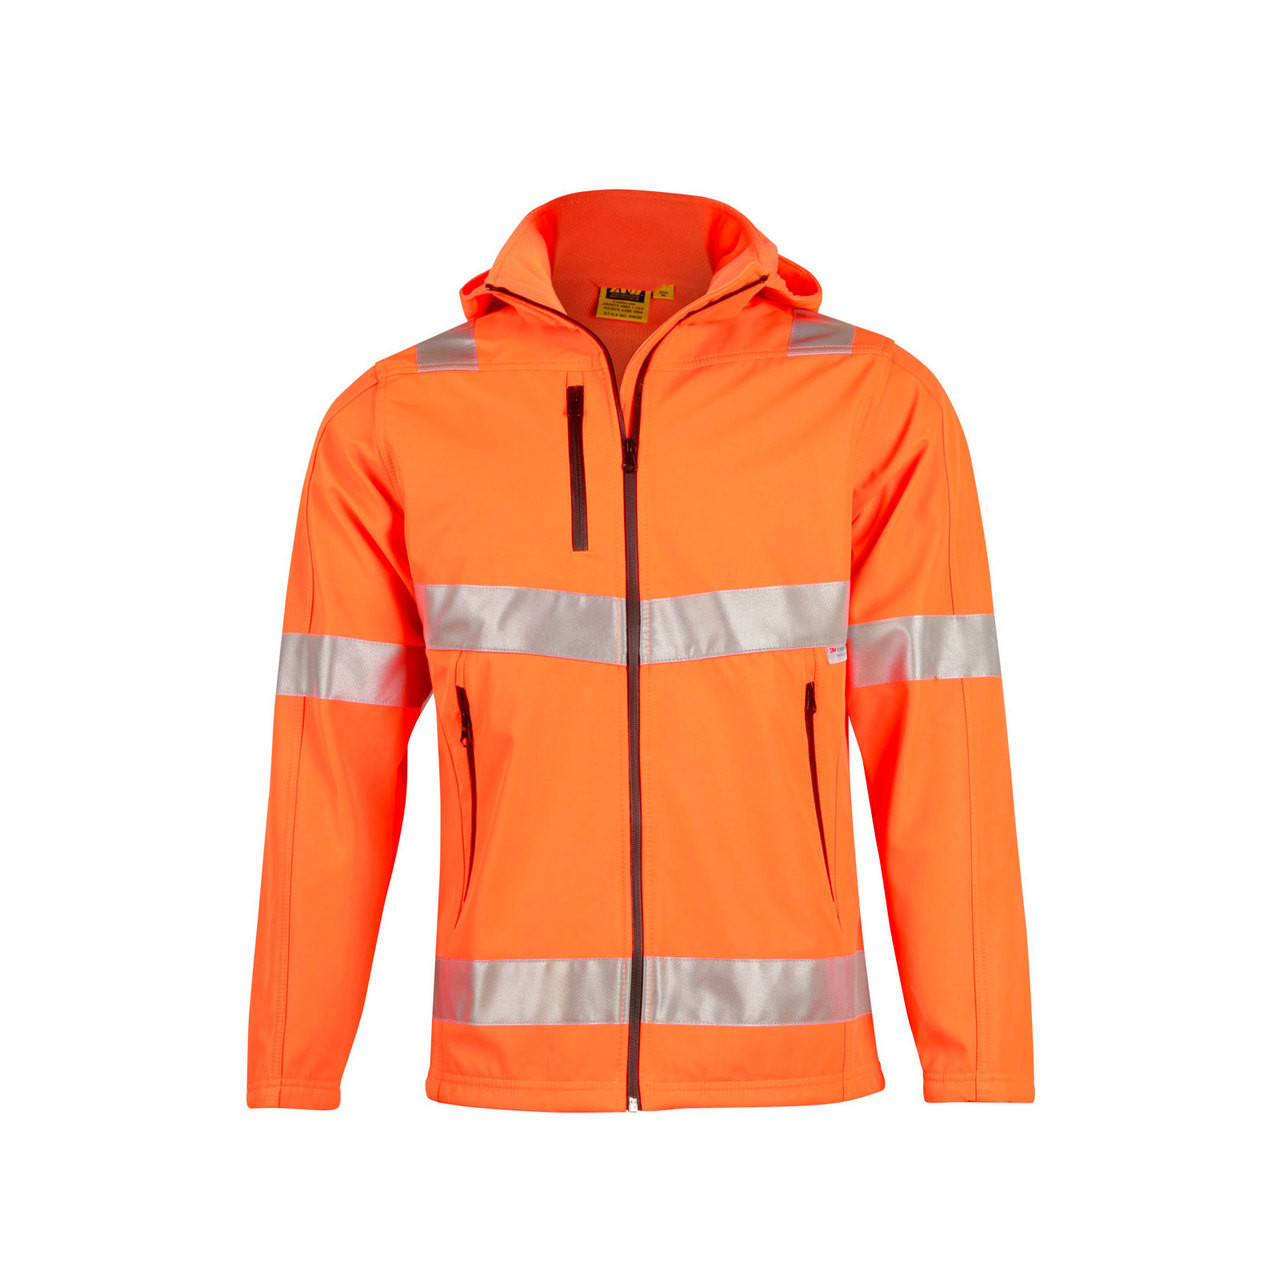 MOVER Hi-Vis Heavy Duty Softshell Jacket with Reflective Tapes | Buy ...